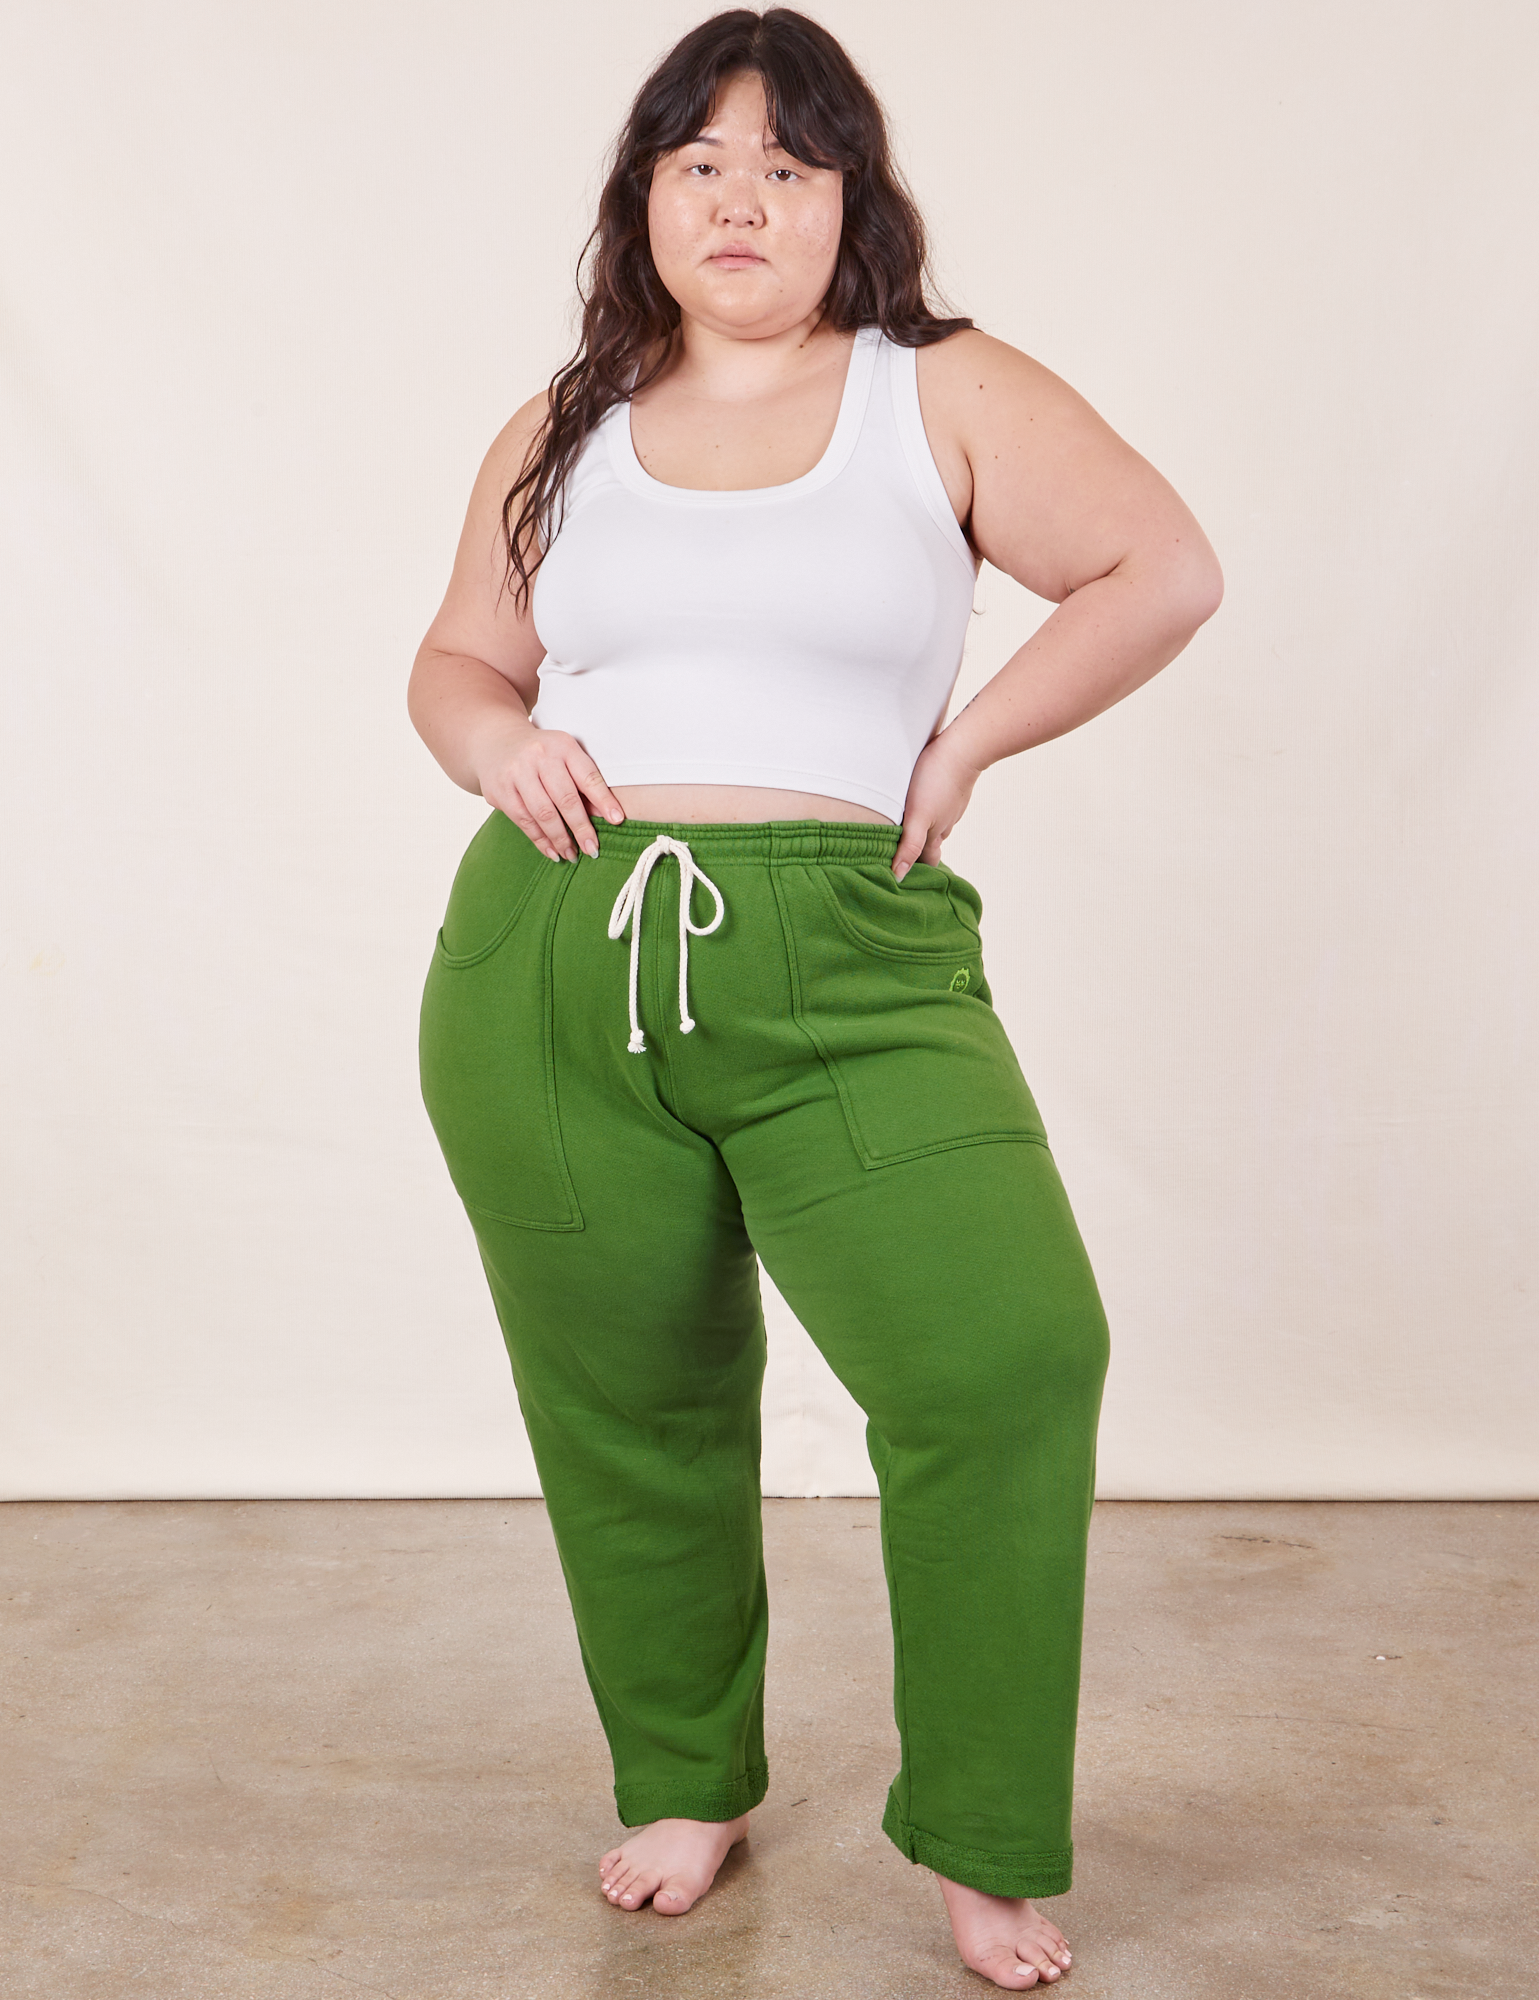 Ashley is 5&#39;7&quot; and wearing XL Cropped Rolled Cuff Sweatpants in Lawn Green paired with vintage off-white Cropped Tank Top